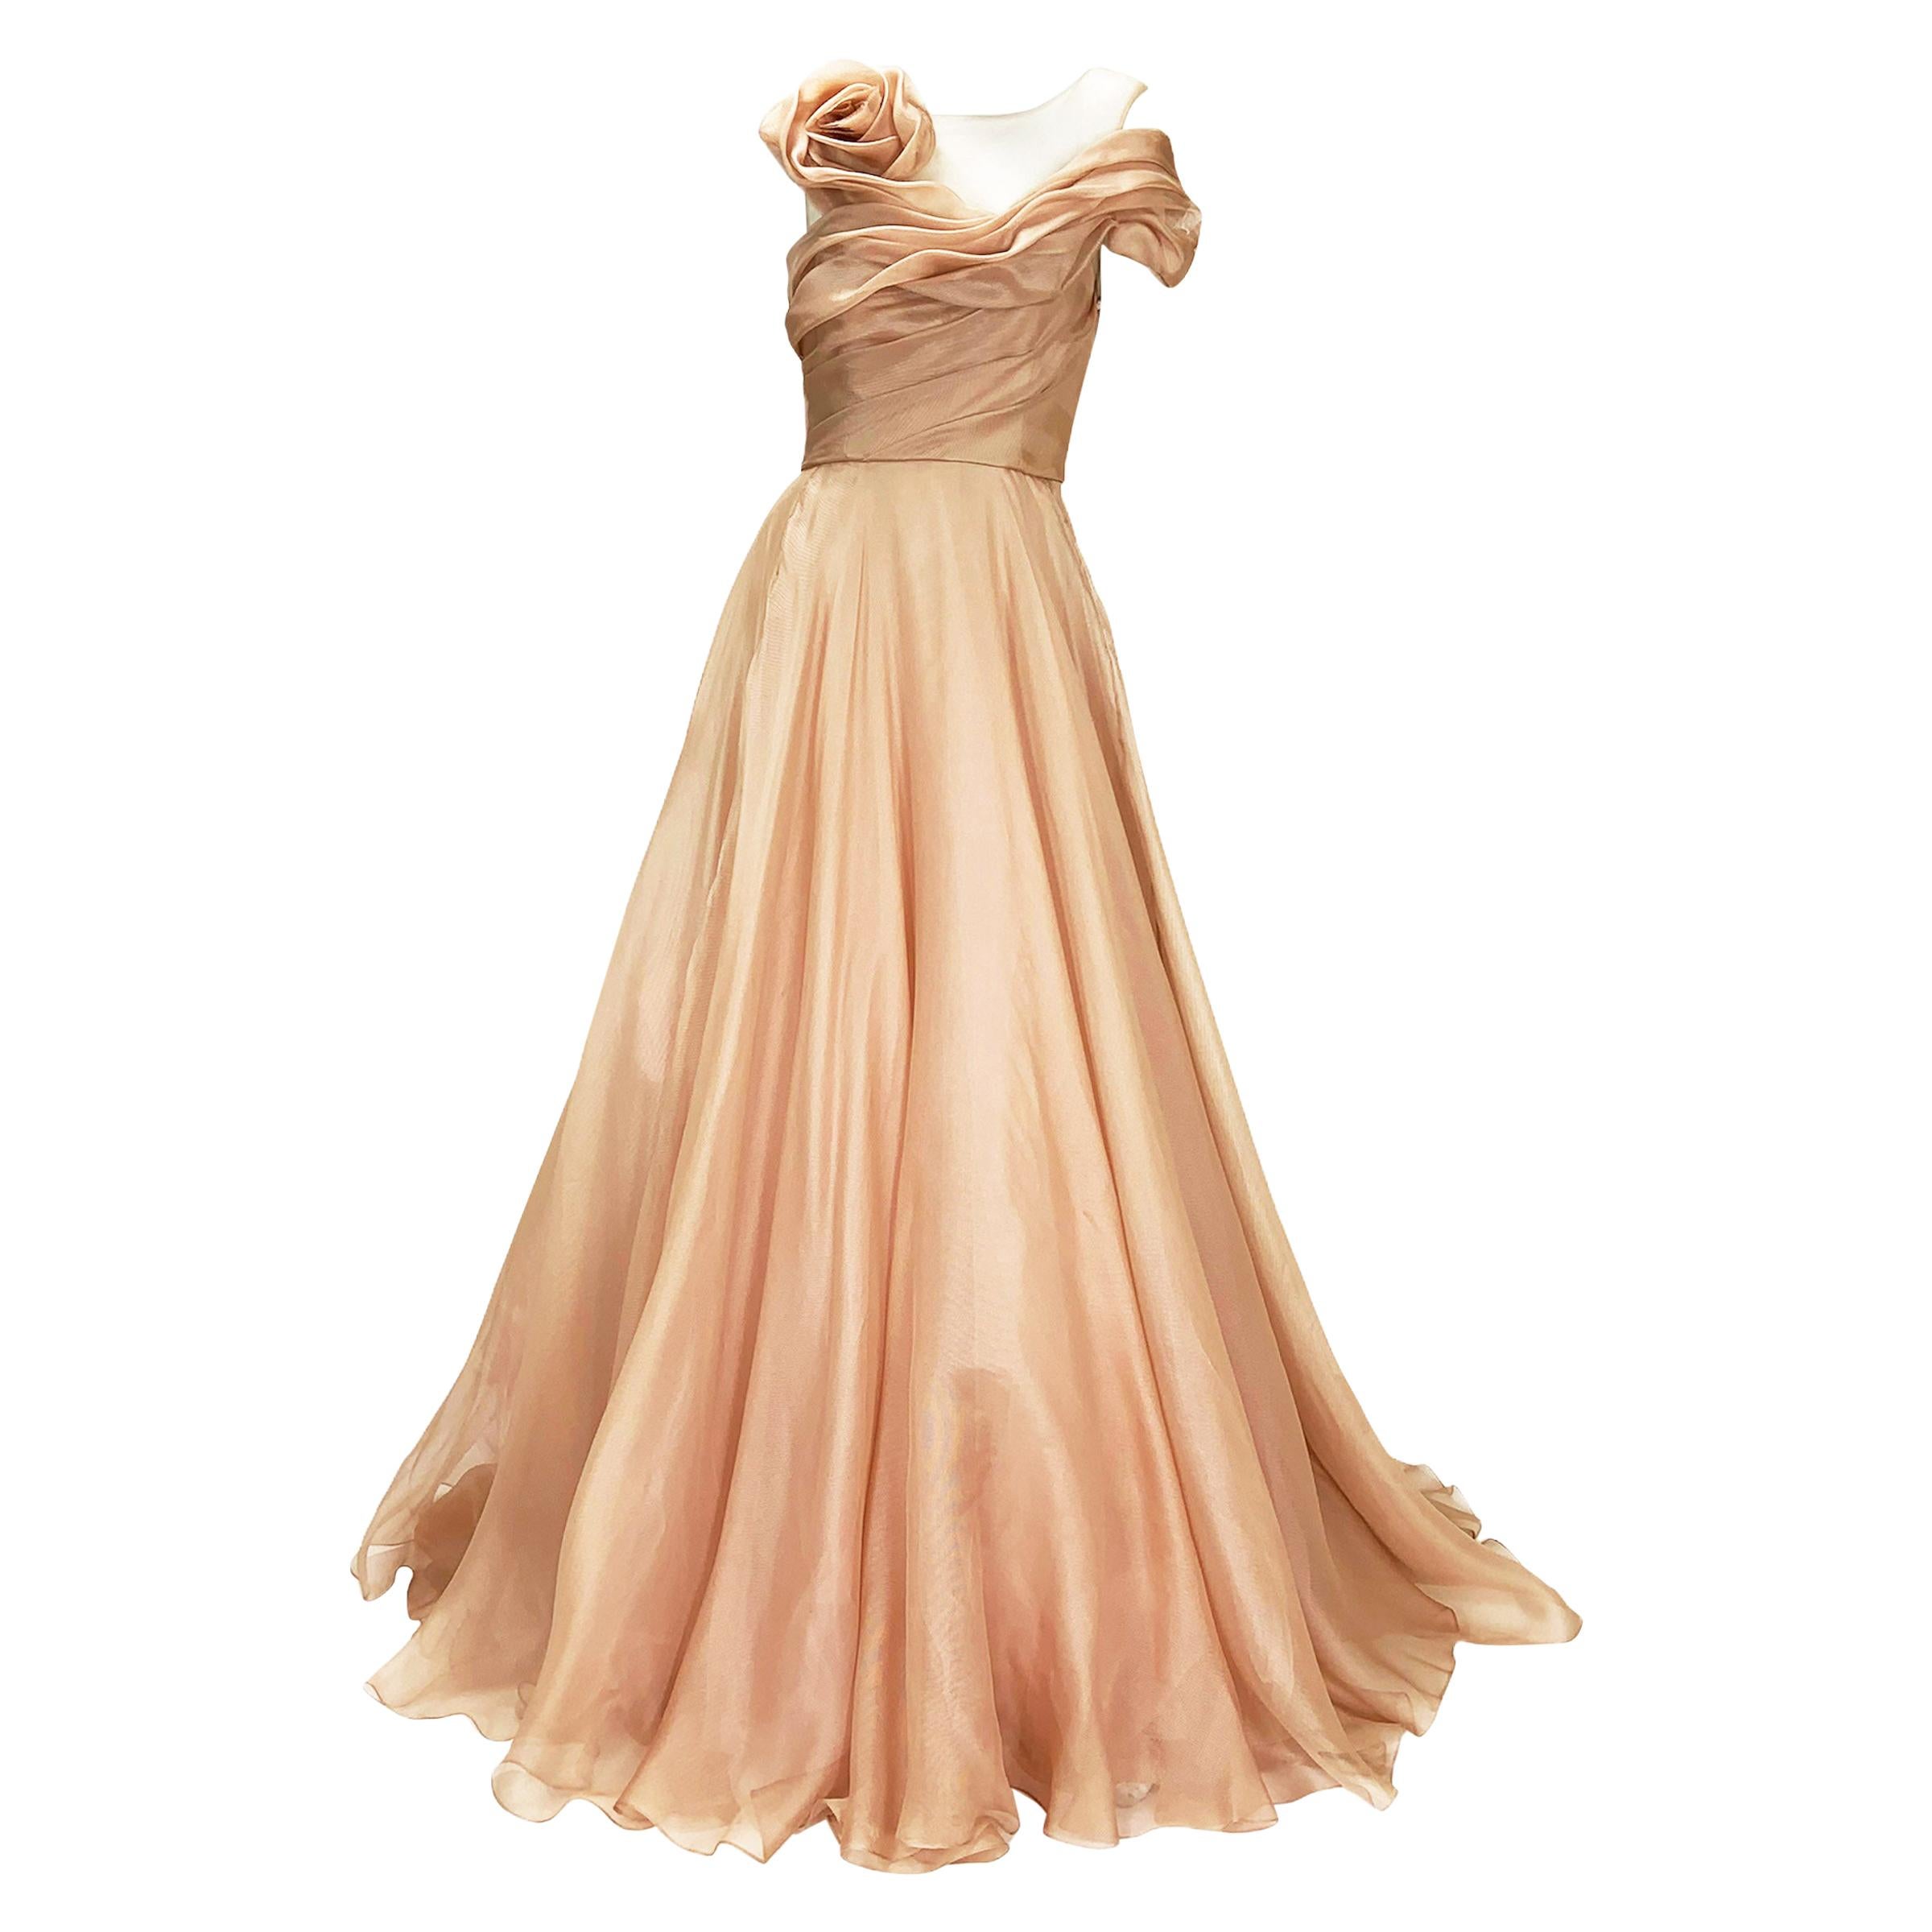 New Marchesa Wedding Ball Silk Nude Tulle Dress Gown US 4